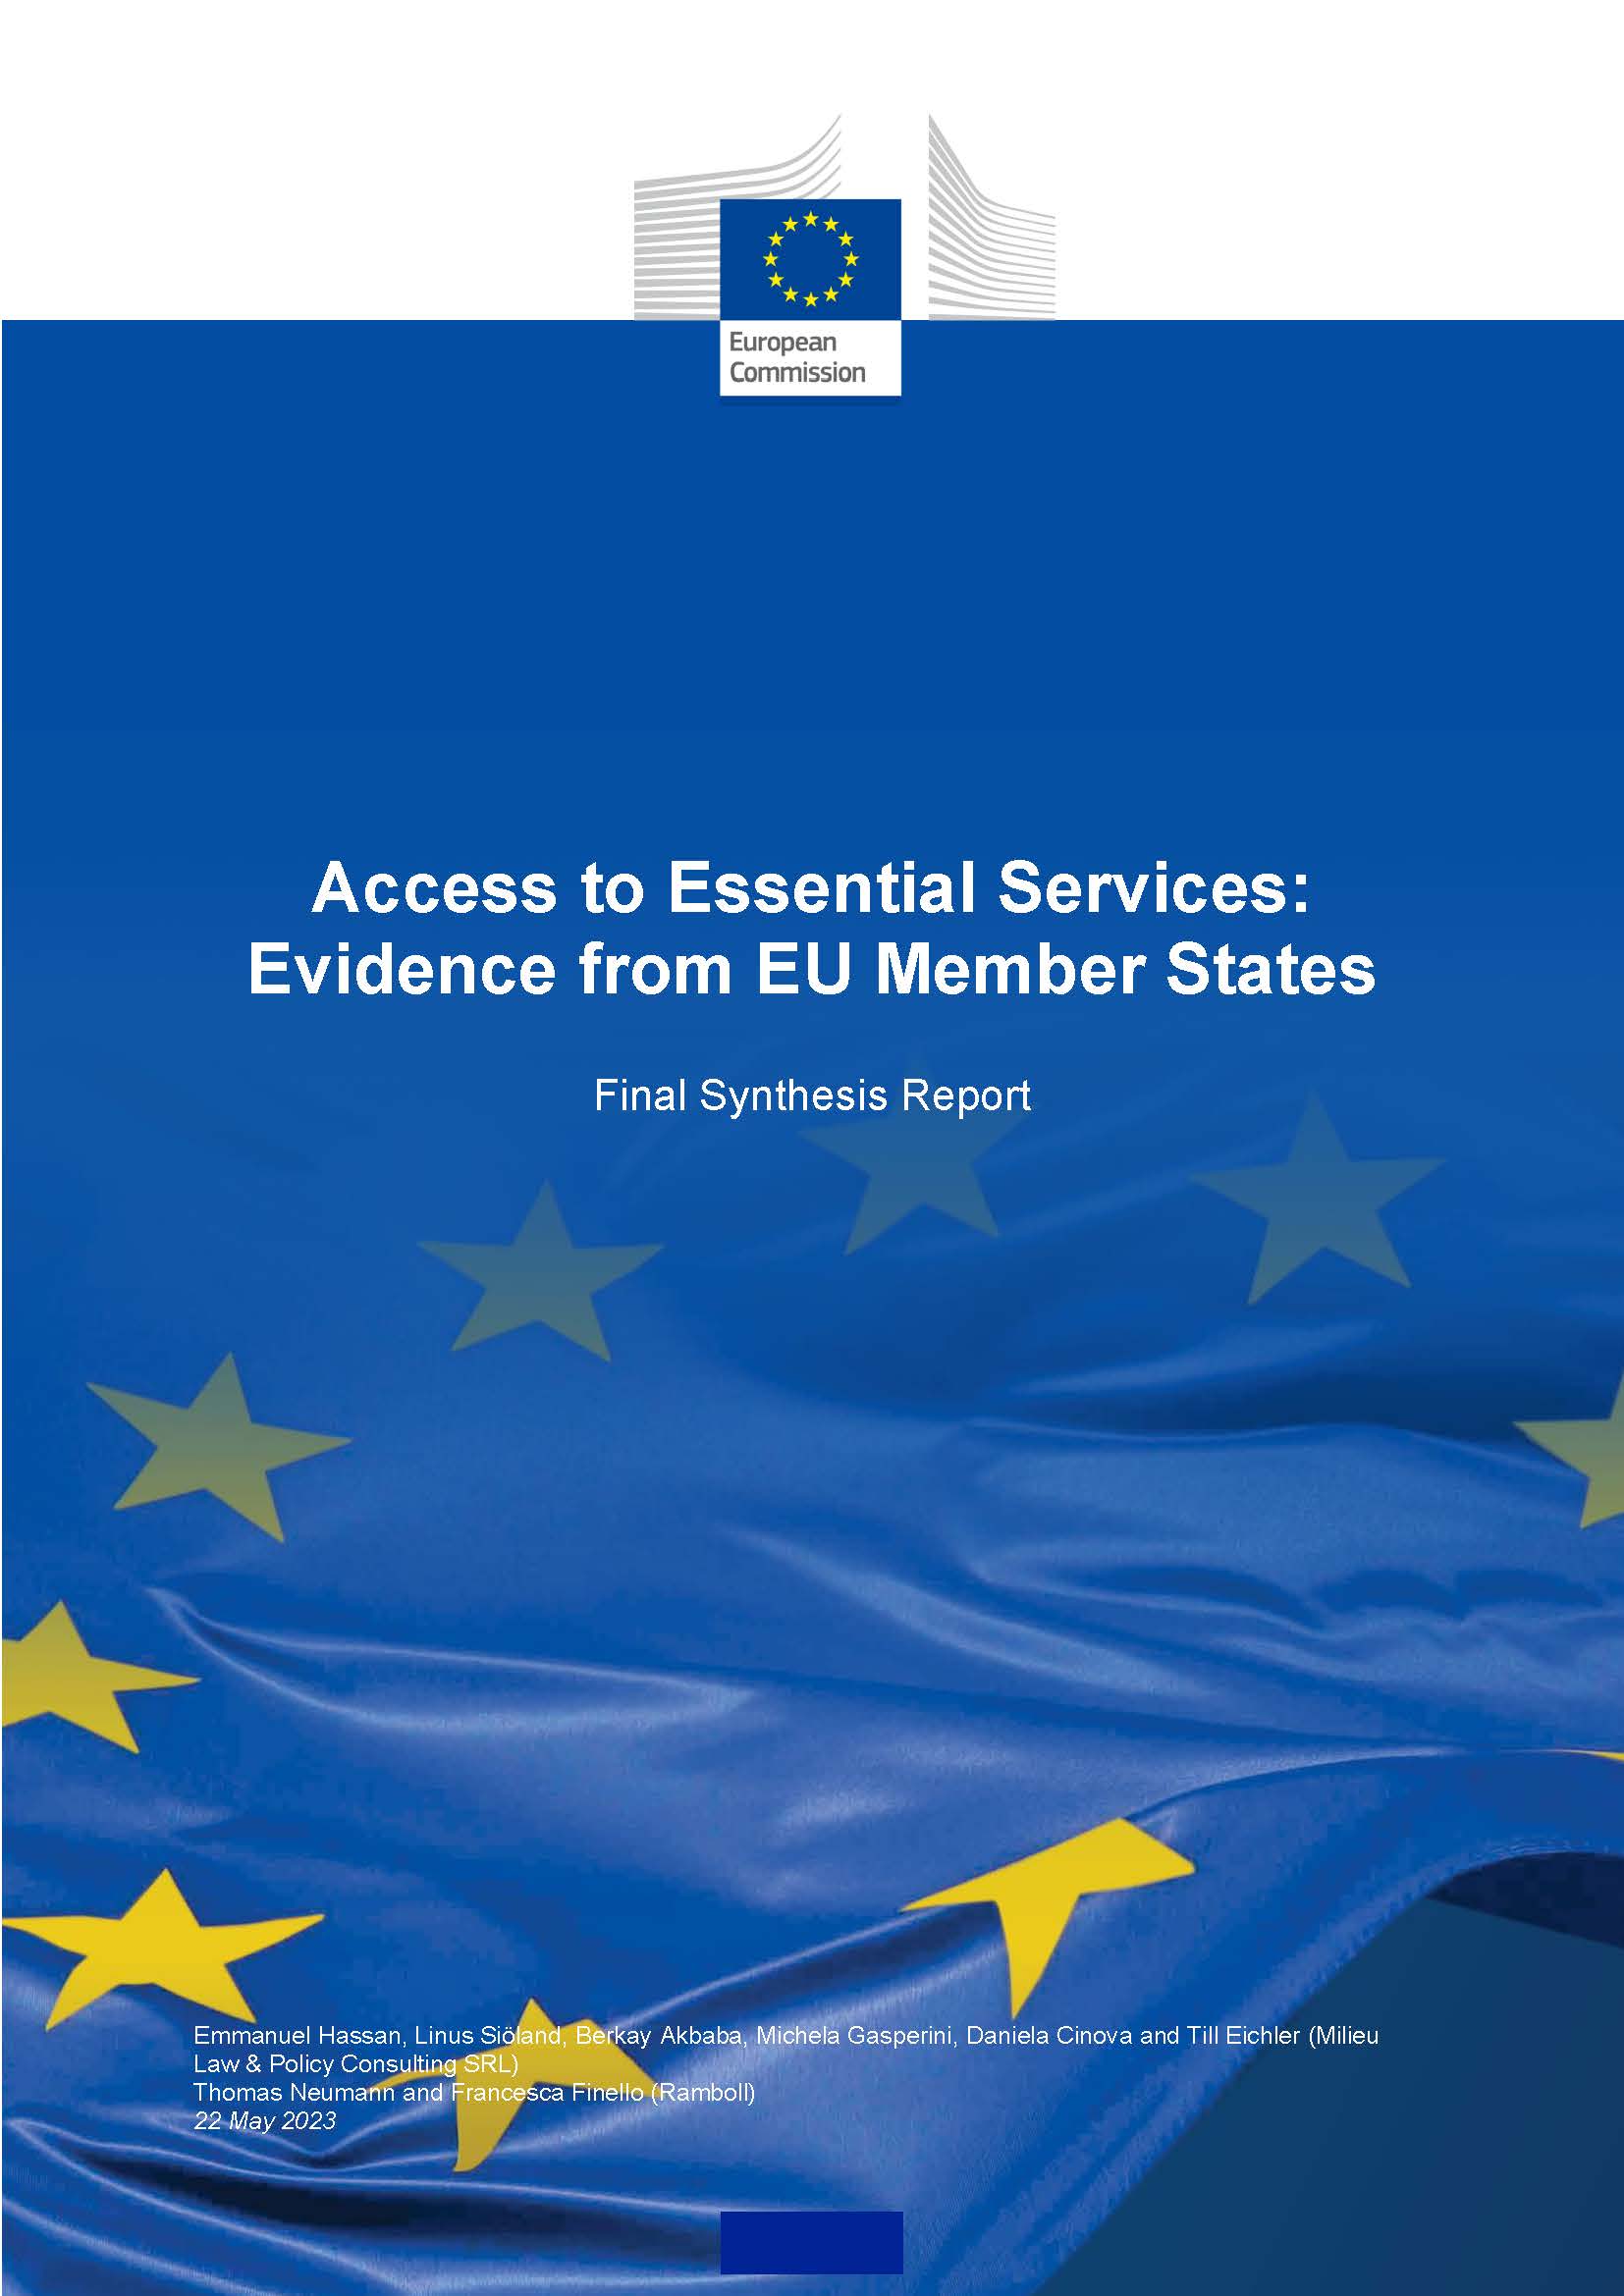 Access to Essential Services: Evidence from EU Member States
Final Synthesis Report